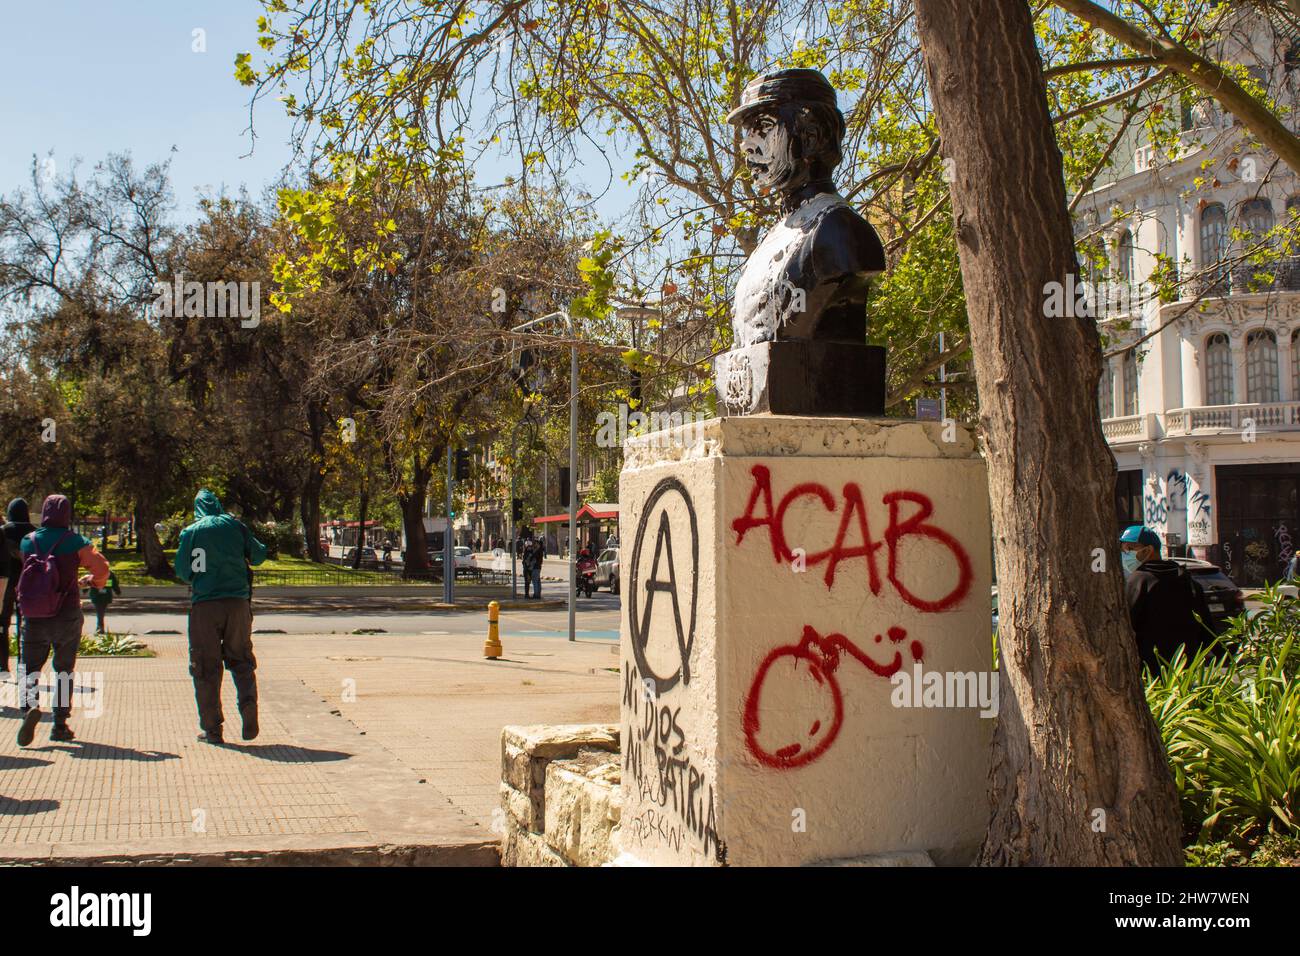 Santiago, Chile - Oct 2, 2021: Vandalized statue at Pro immigration march Stock Photo